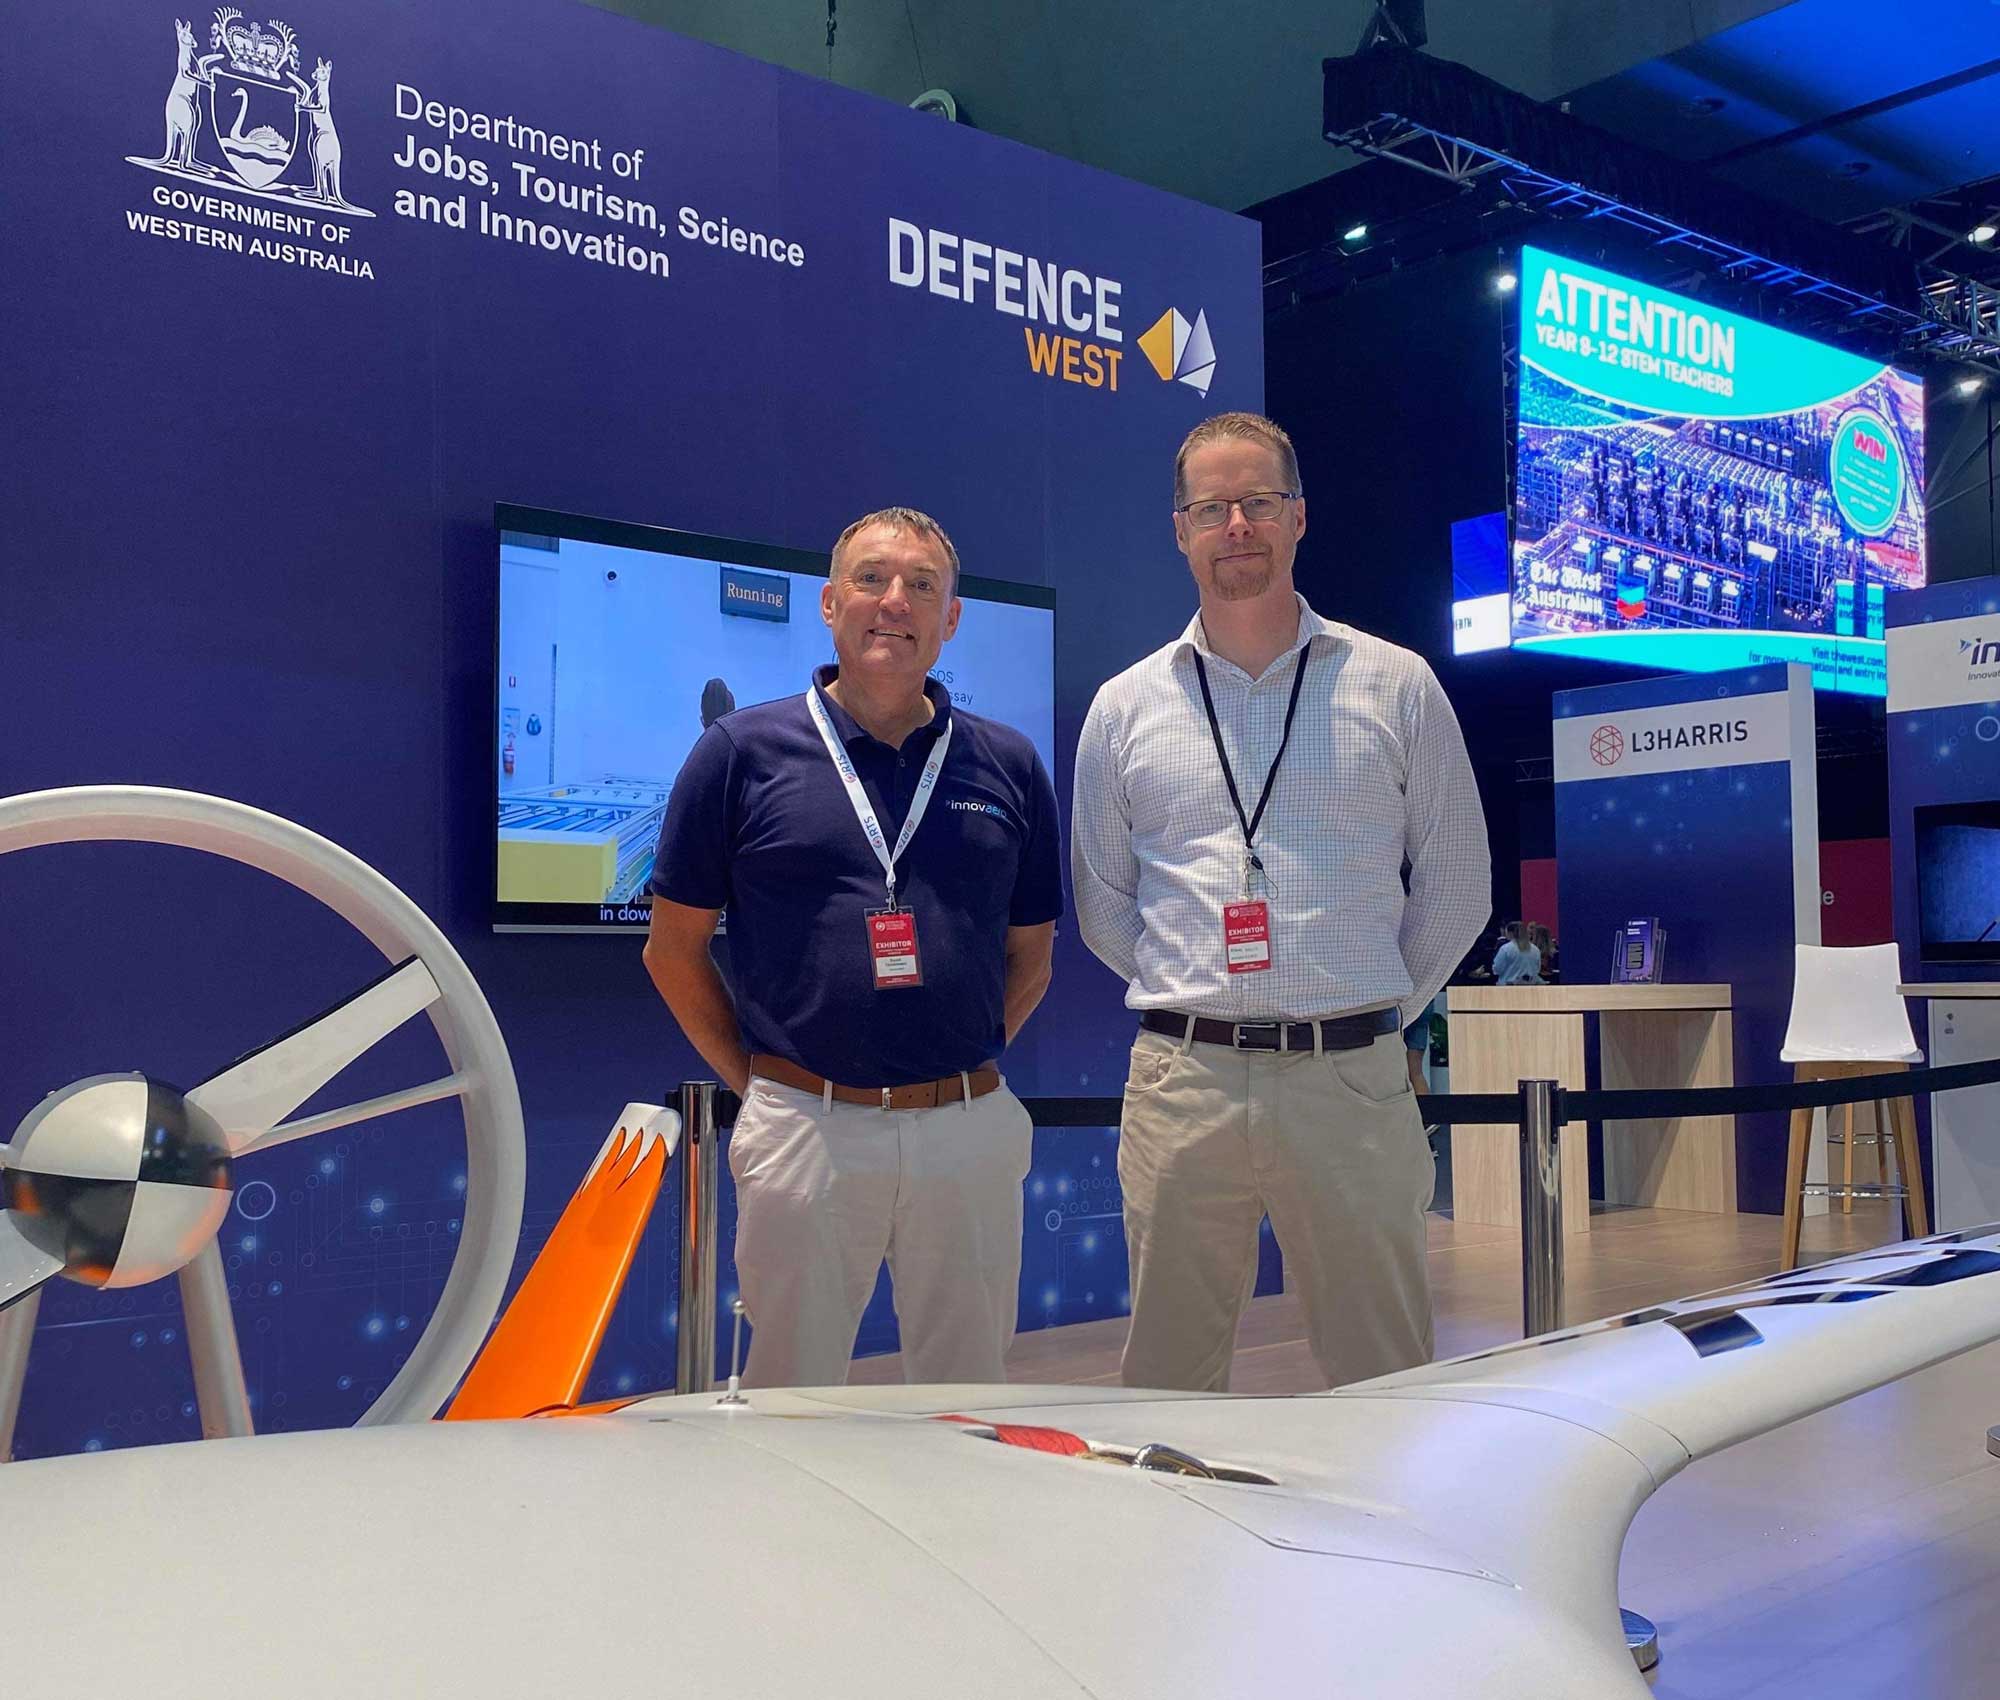 Dave Tomkinson, Innovaero Operations Manager and  Adam Kelly, Innovaero Airborne Systems Manager from Innovaero at the Defence West Stand in WA Resource and Technology Showcase 2023